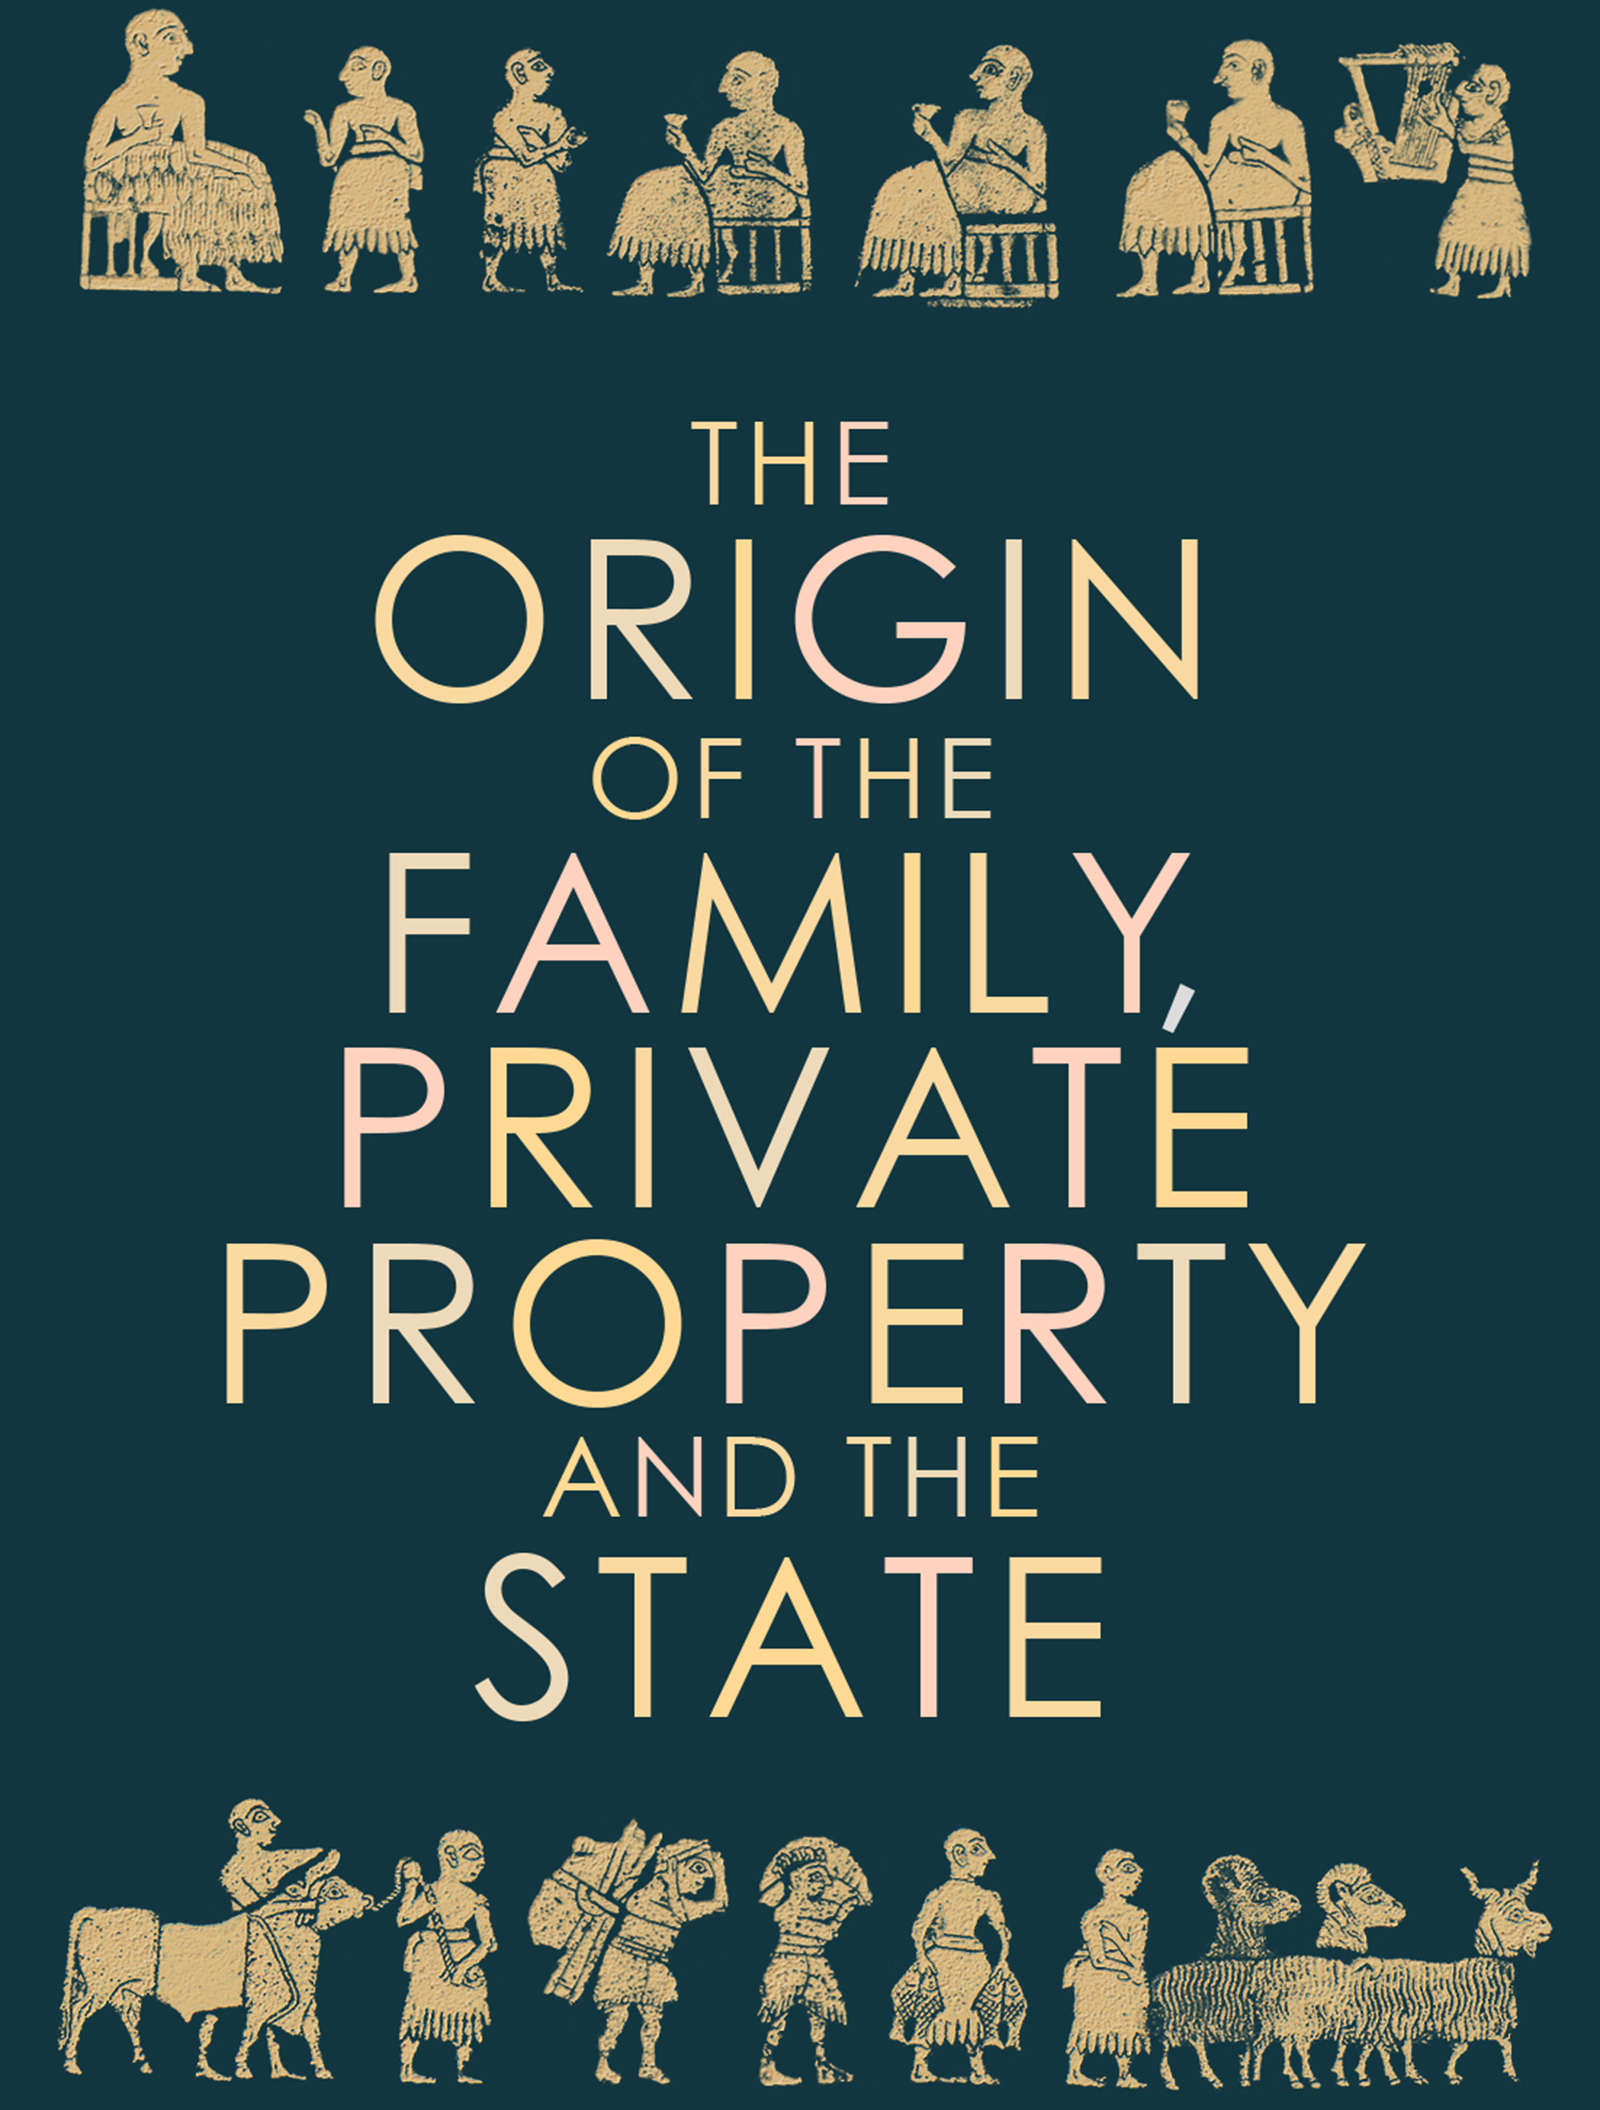 Classics] The Origin of the Family, Private Property and the State, Marxist classics